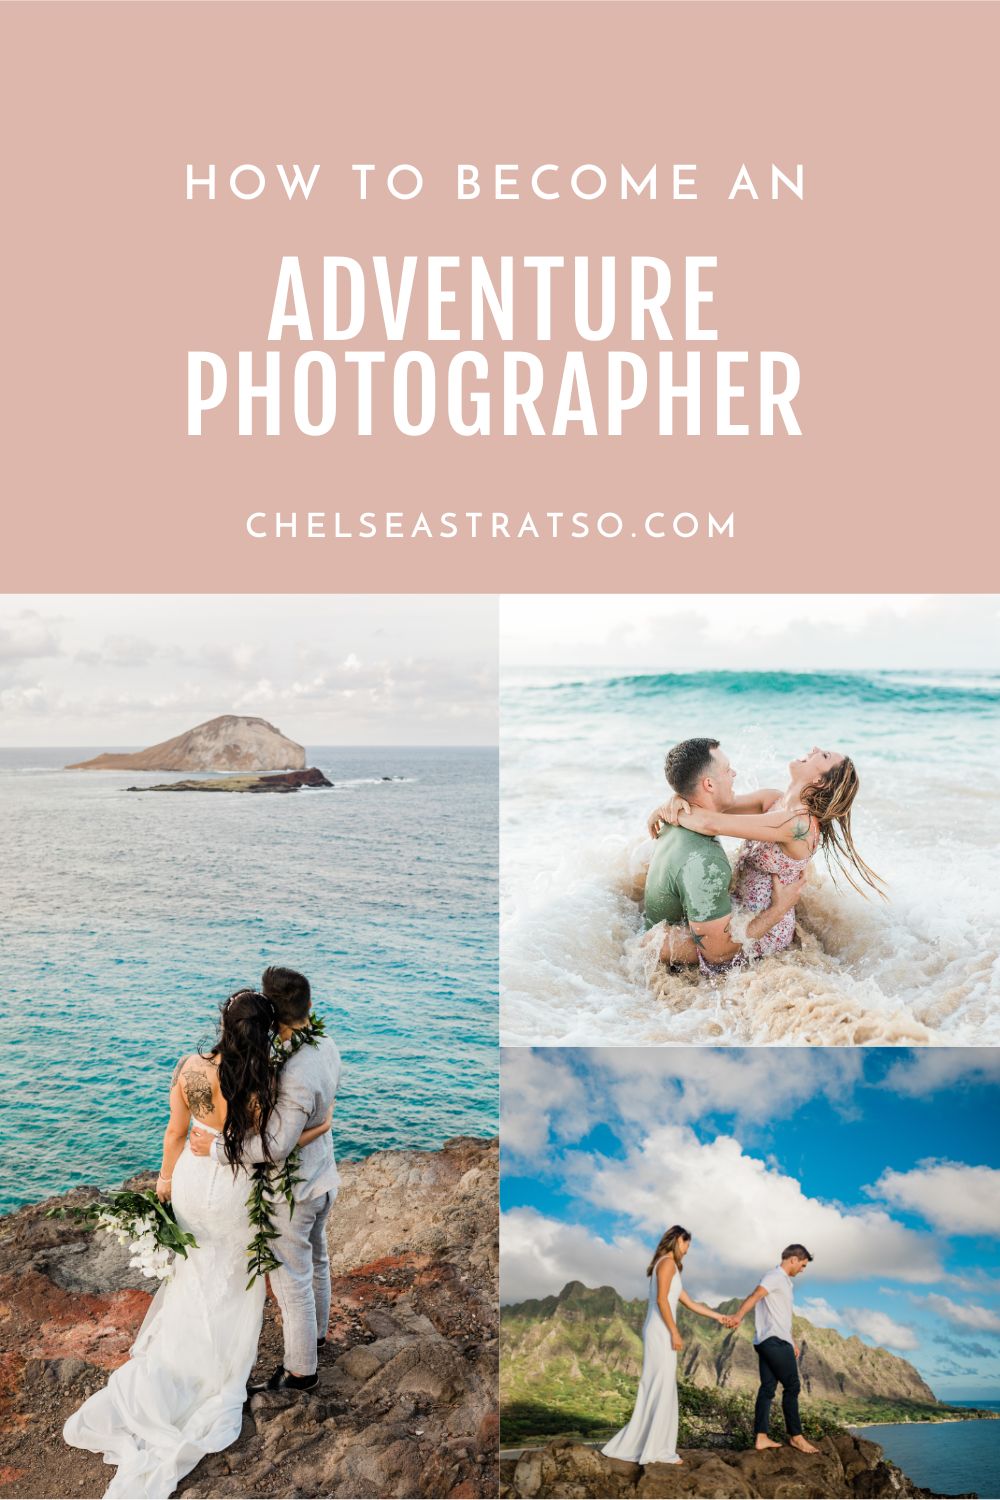 Pinterest pin how to become an adventure photographer